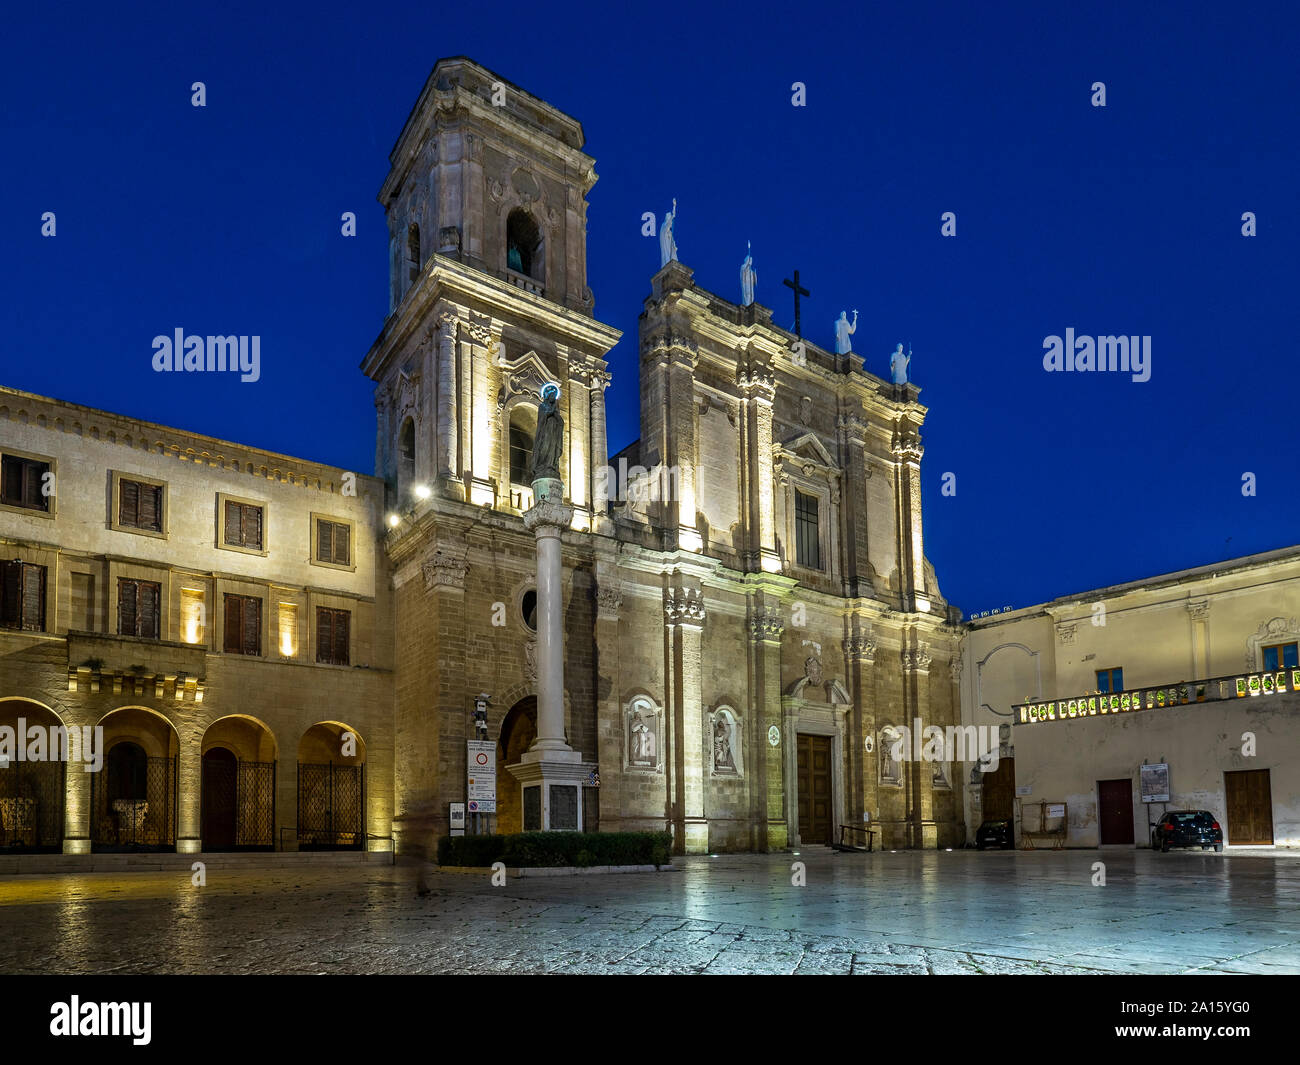 Facade of illuminated cathedral in Brindisi against clear blue sky at night Stock Photo